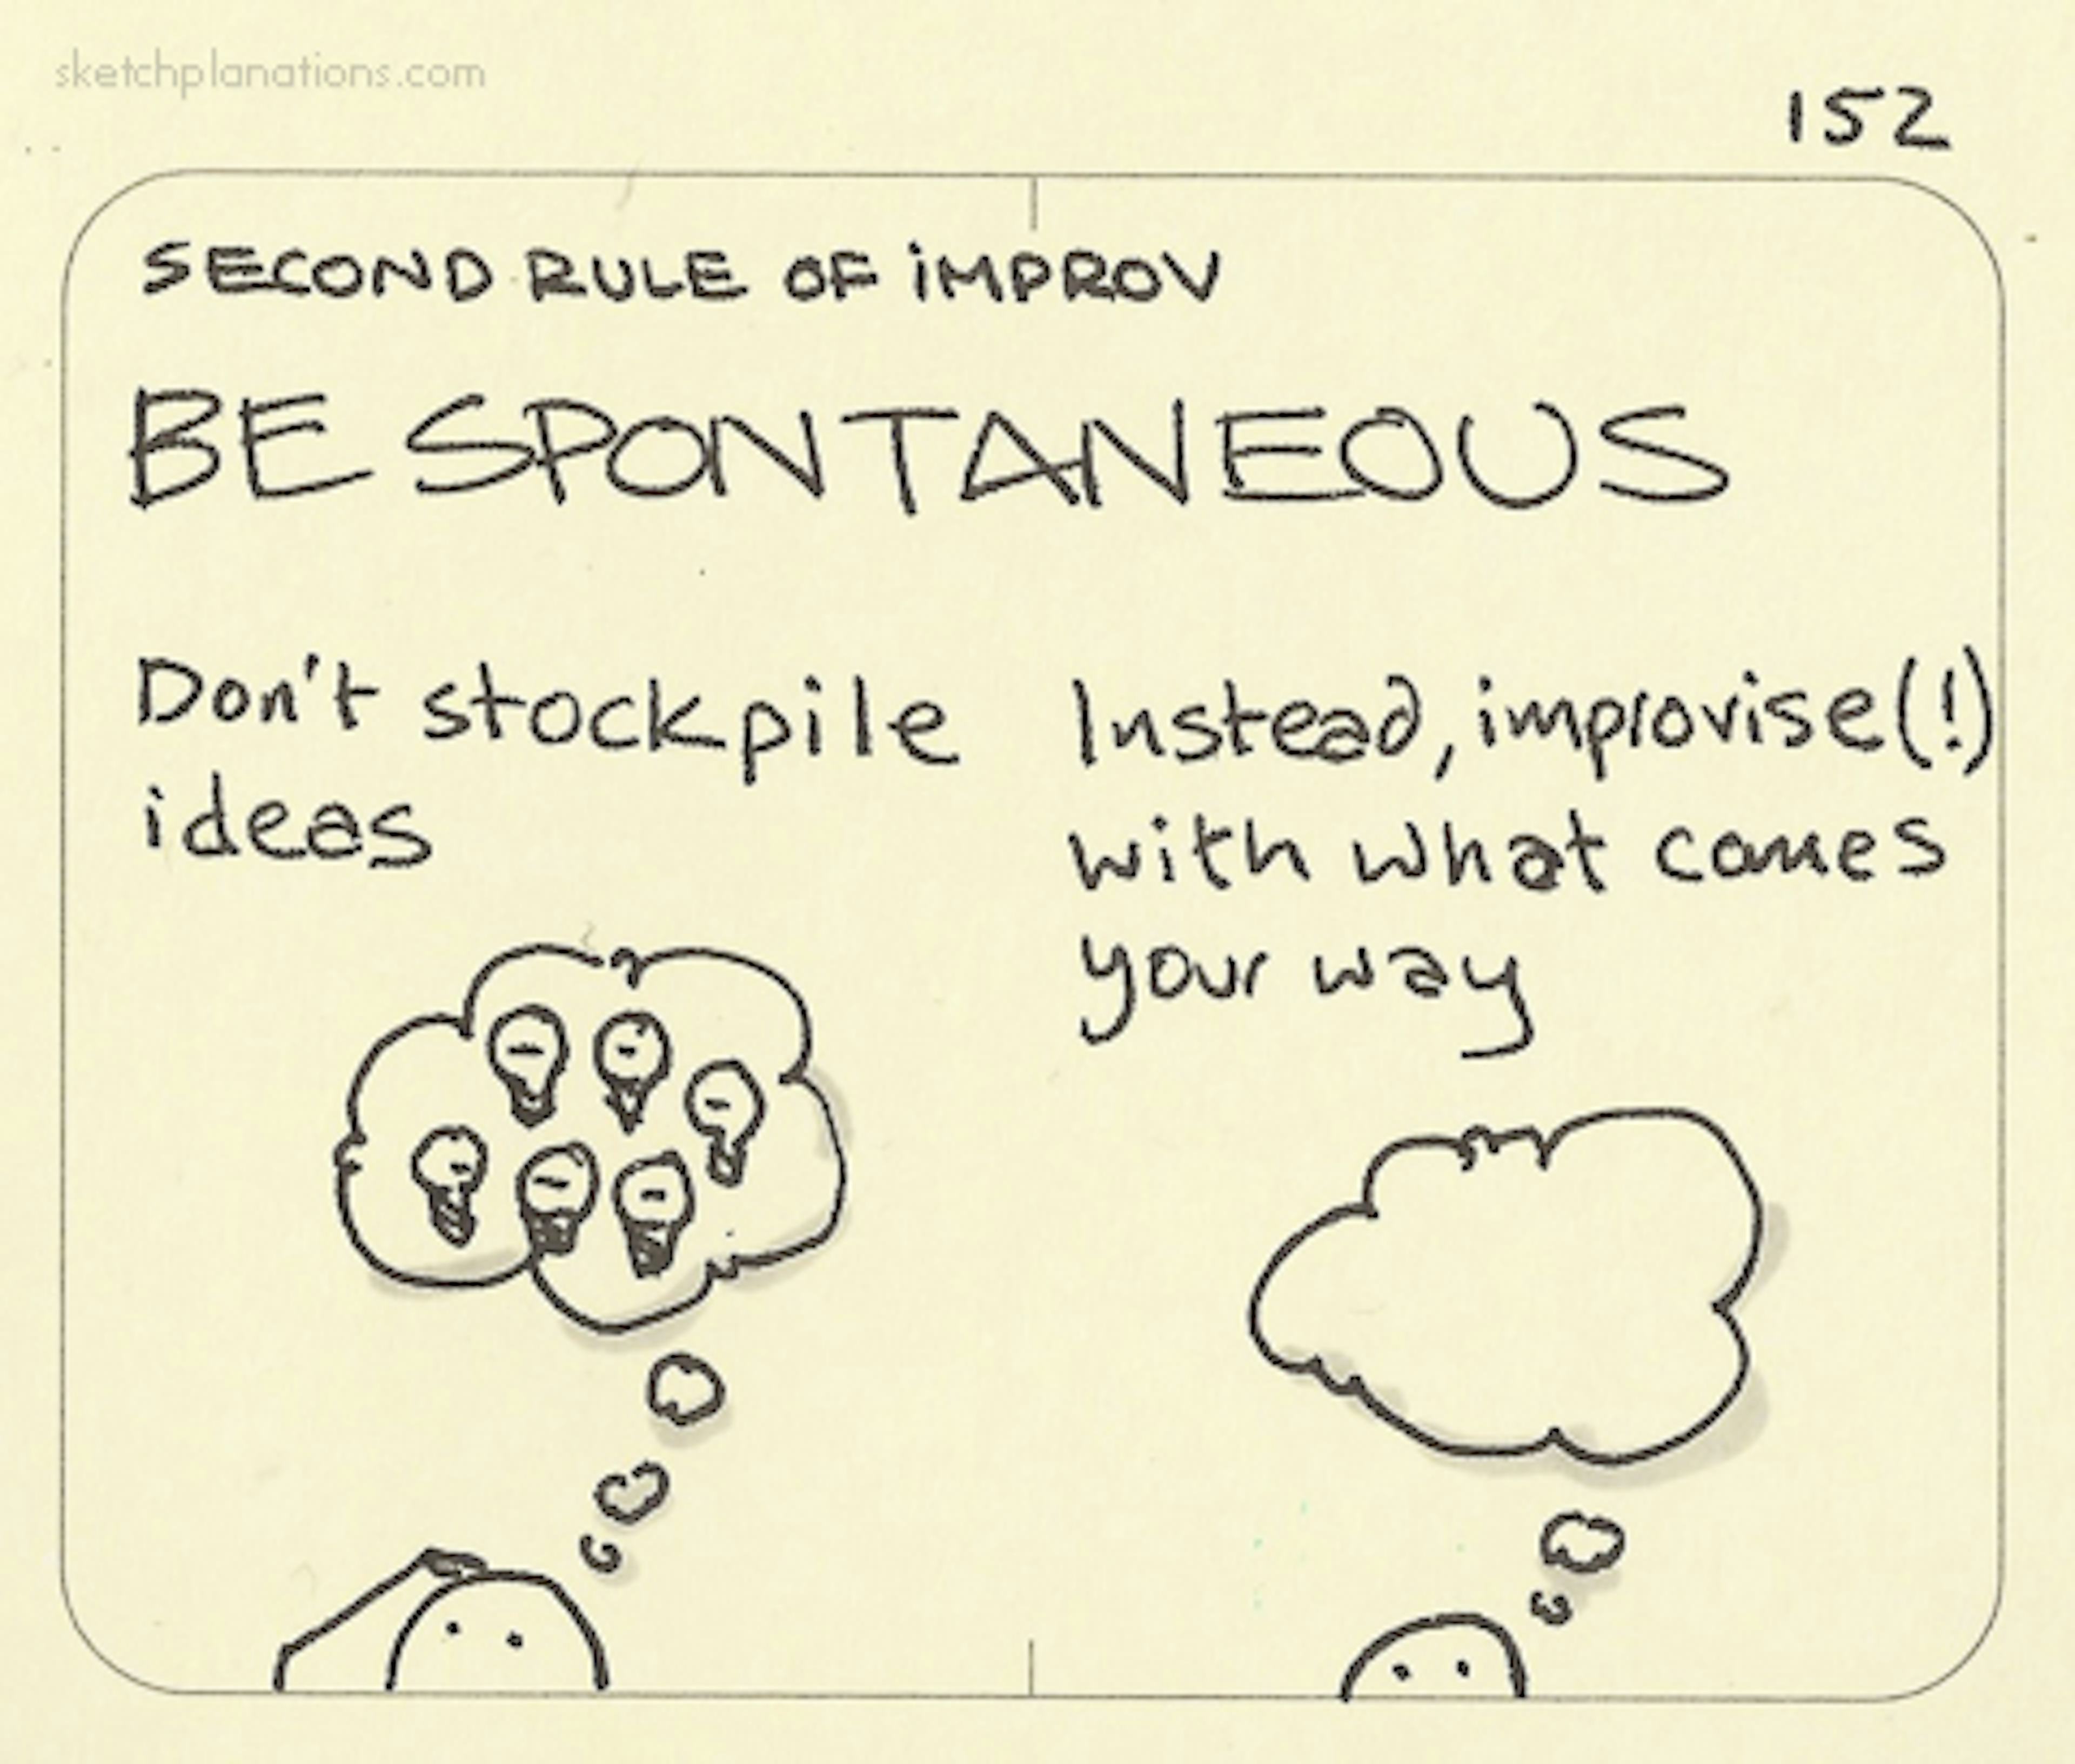 Second rule of improv: Be spontaneous - Sketchplanations